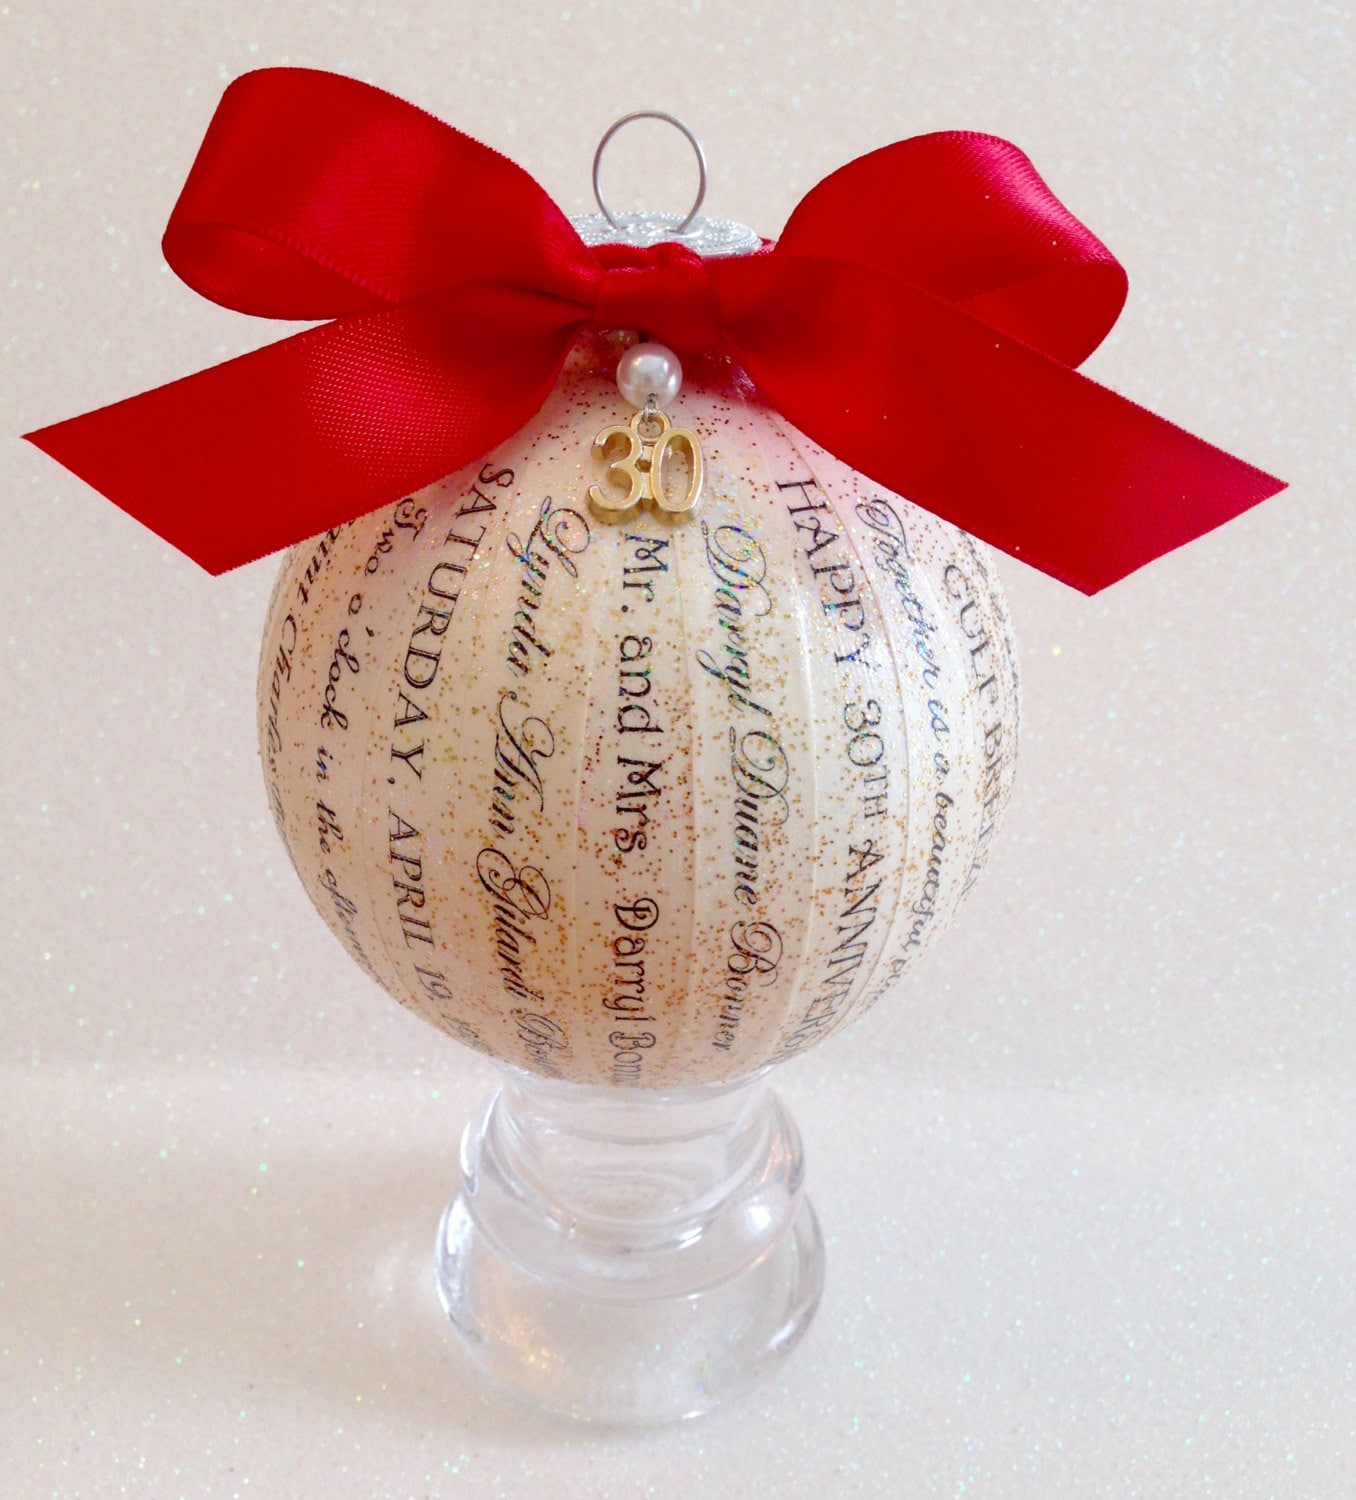 30th Anniversary Gifts
 30th Anniversary Gift Unique Personalized Ornament Parent